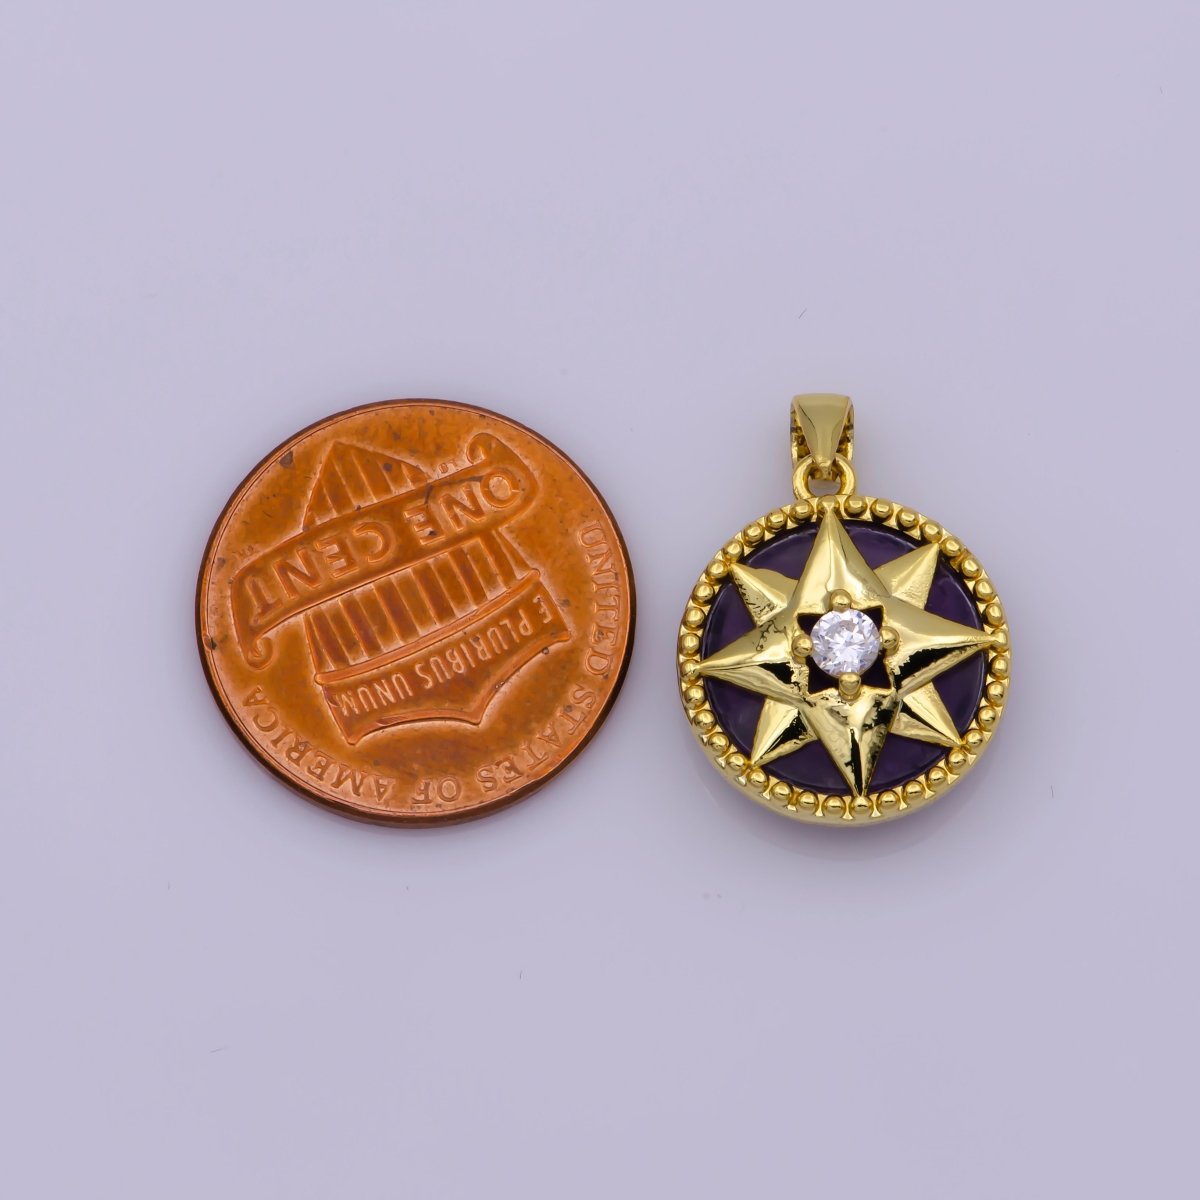 Dainty 24K Gold Filled North Star Charm, Purple Pink Teal Blue Star Coin Pendant For Layer Necklace Earring Bracelet Jewelry Making Supplies I-333 - DLUXCA